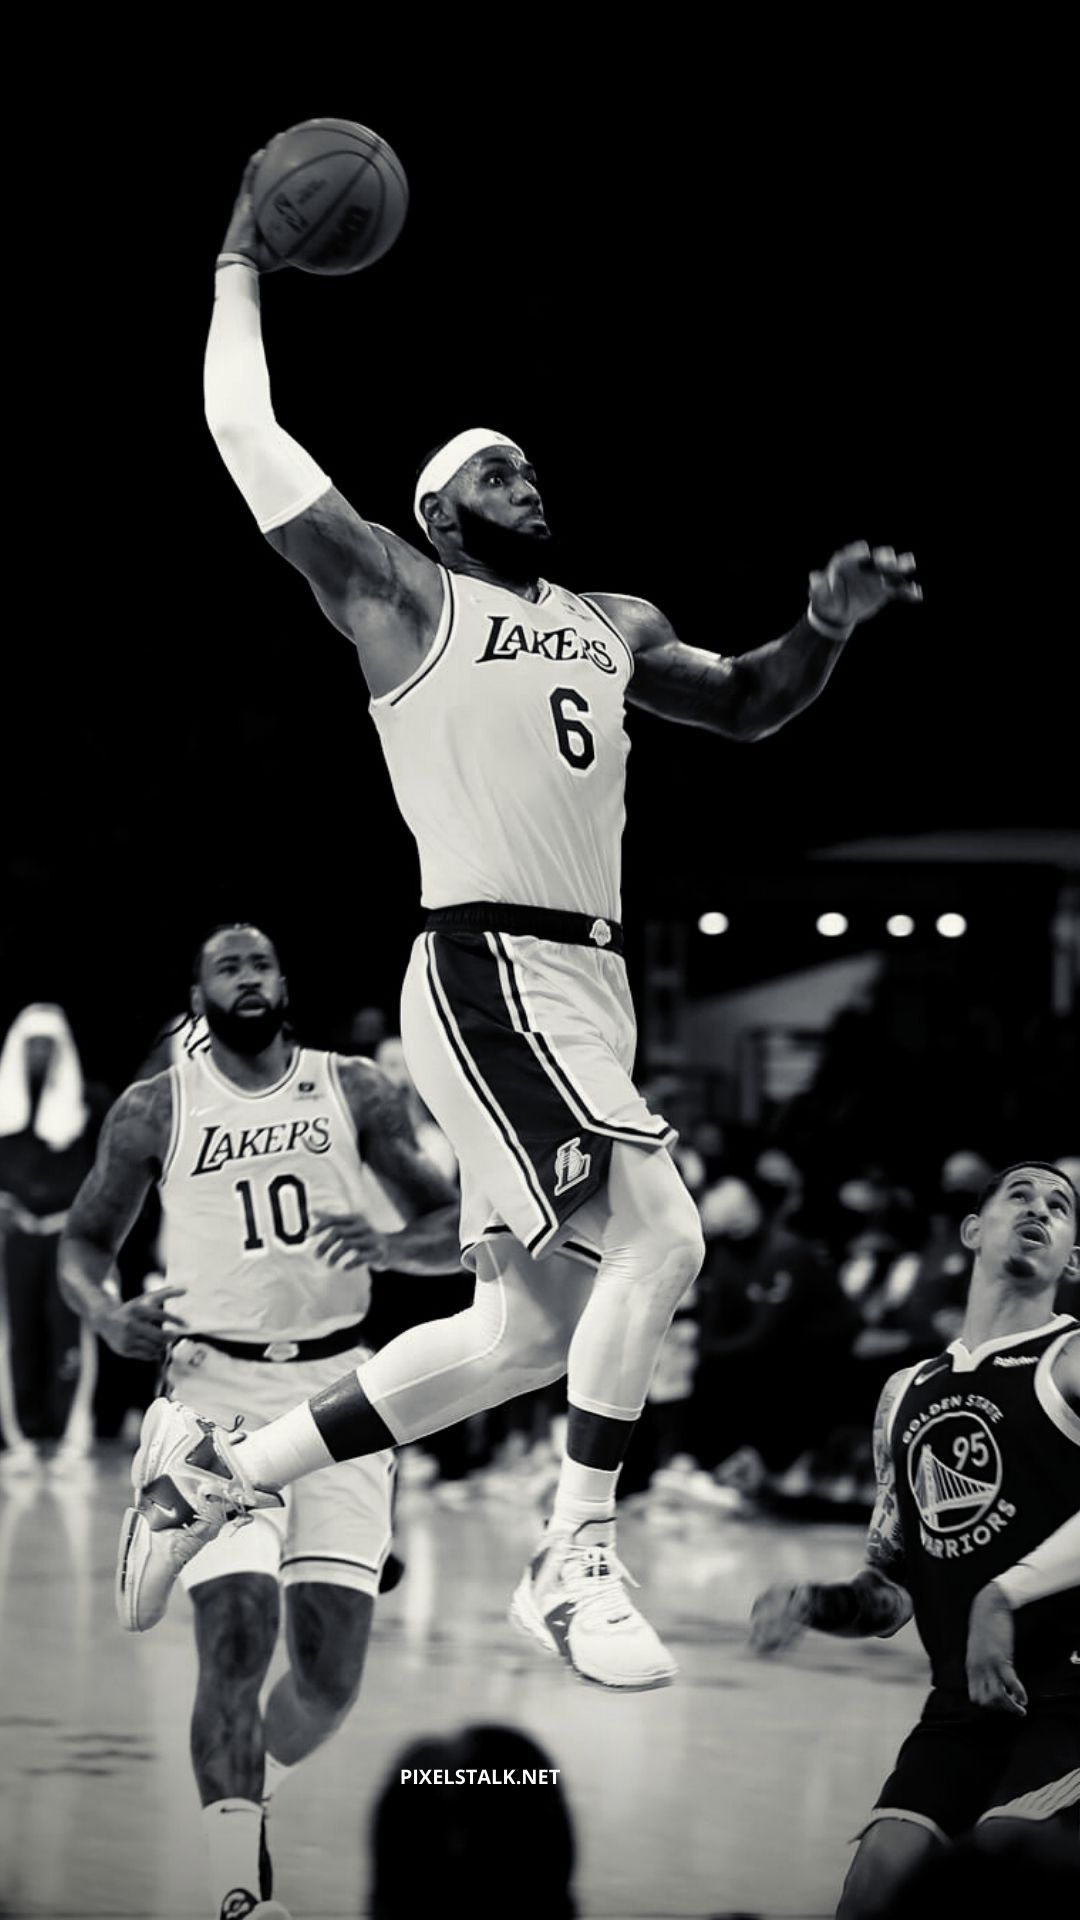 IPhone wallpaper of LeBron James of the Los Angeles Lakers. - Lebron James